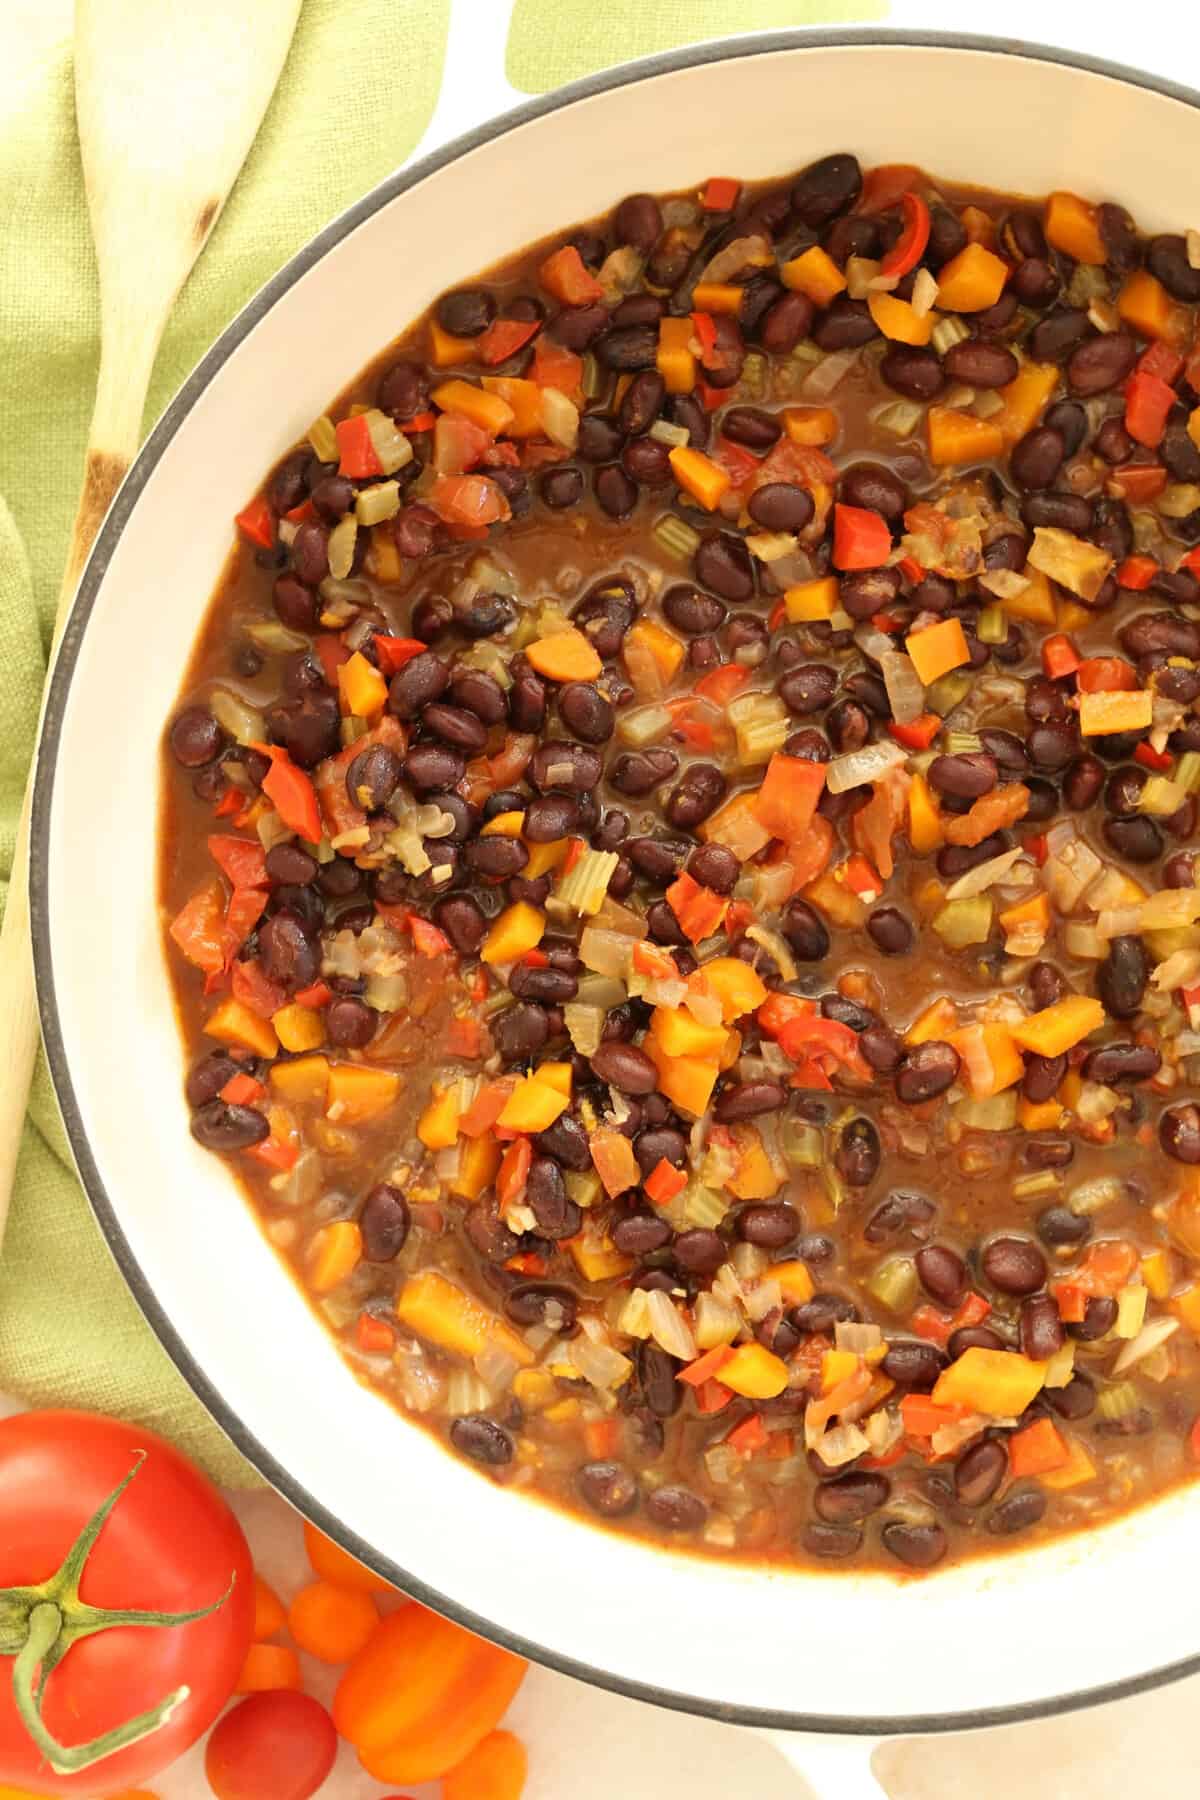 This Vegetarian Black Bean Stew makes a perfect comforting meal any night of the week.  The recipe calls for canned black beans, so this simple dish comes together in a pinch